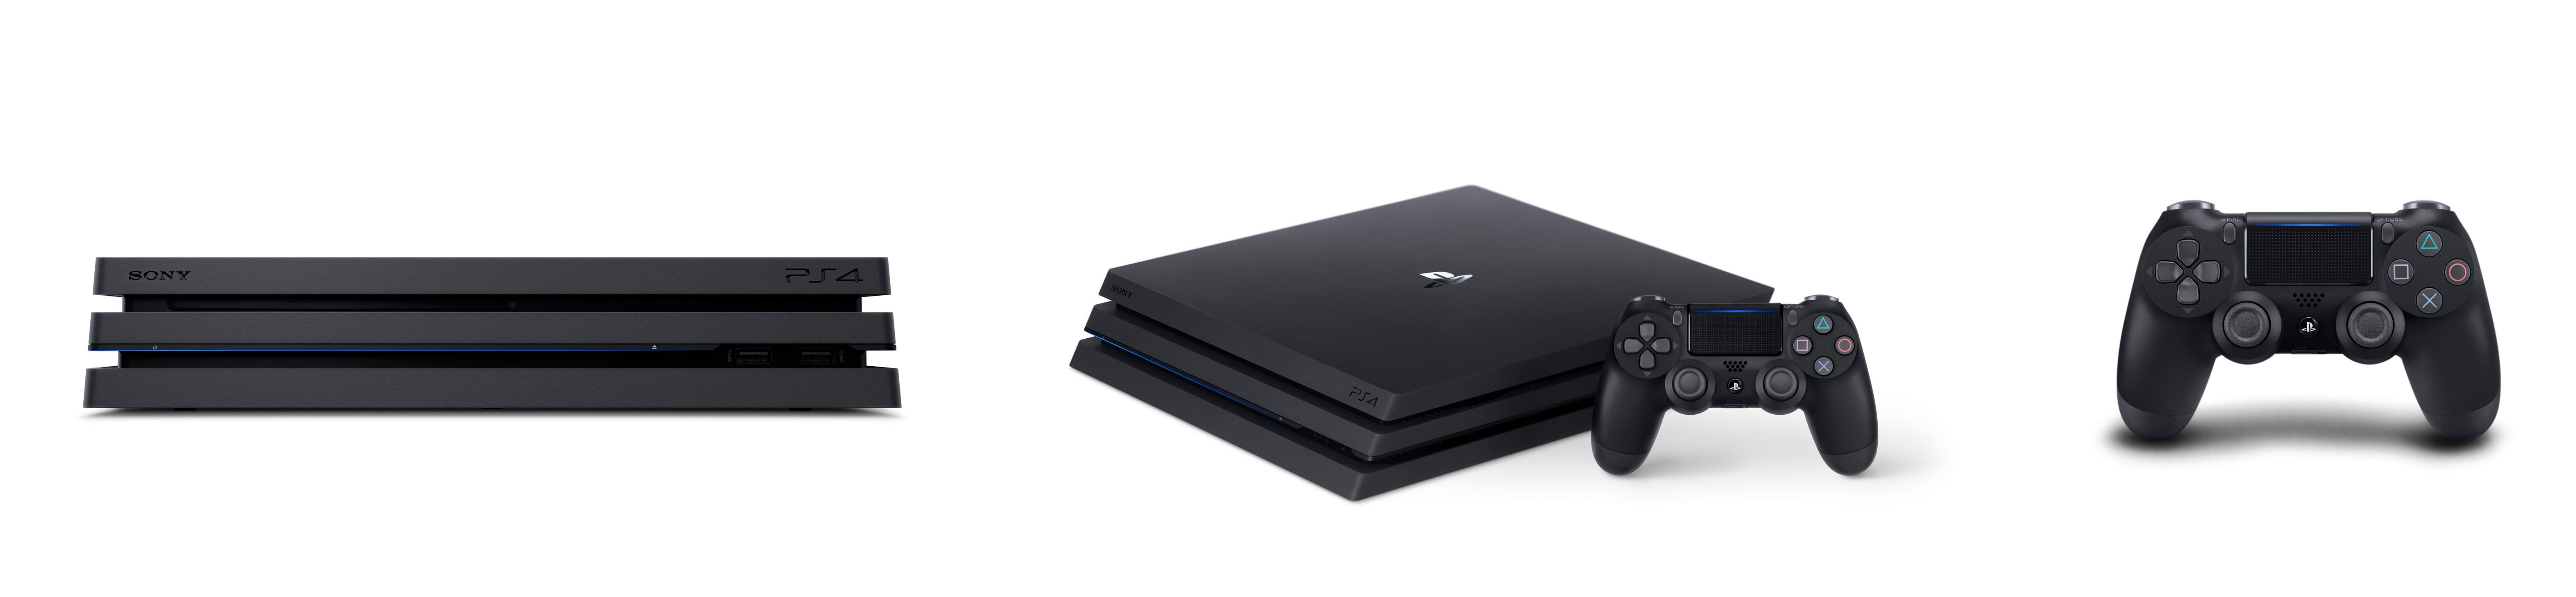 Making the case for the PS4 Pro that Sony didn't | by Roman M France | The  Optional